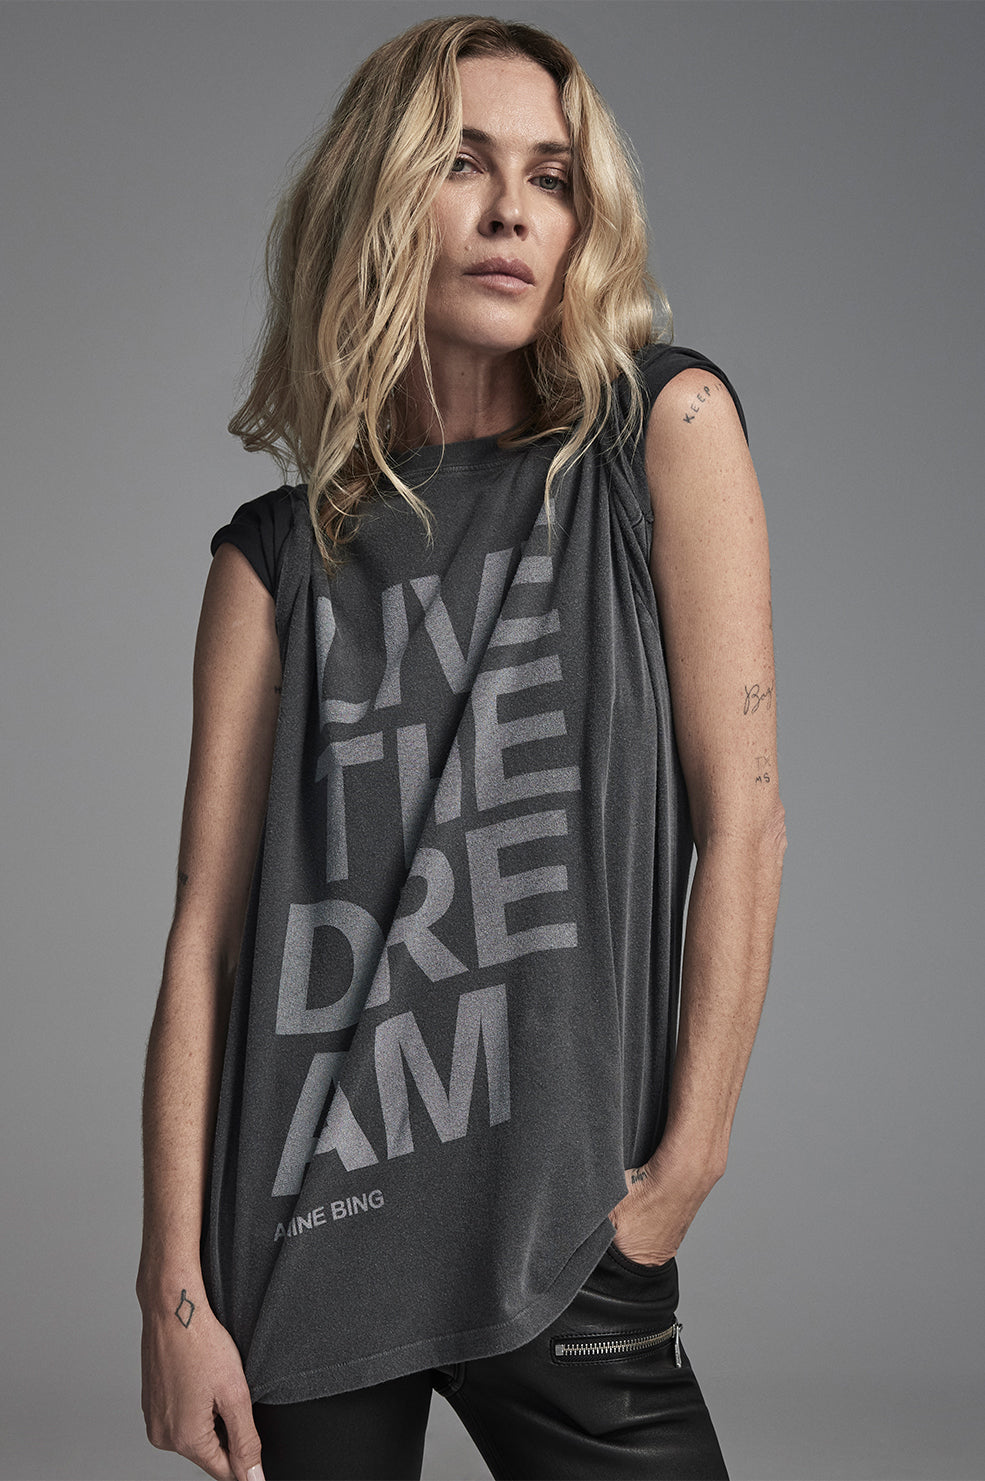 ANINE BING Cason Tee Live The Dream - Washed Black - On Erin Wasson